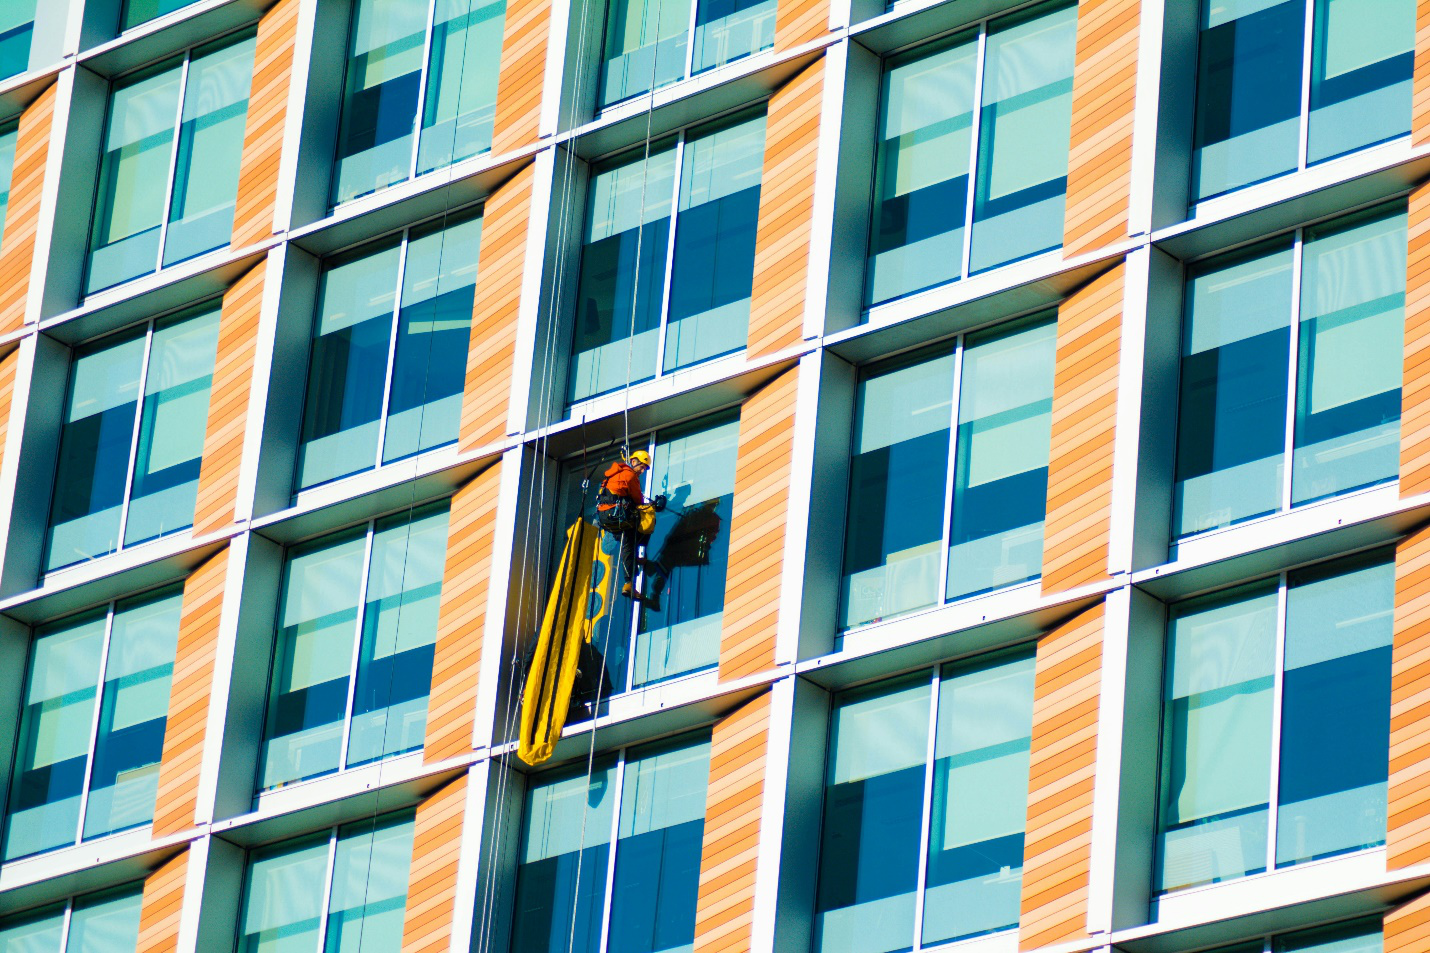 A window washer cleaning the side of a skyscraper.